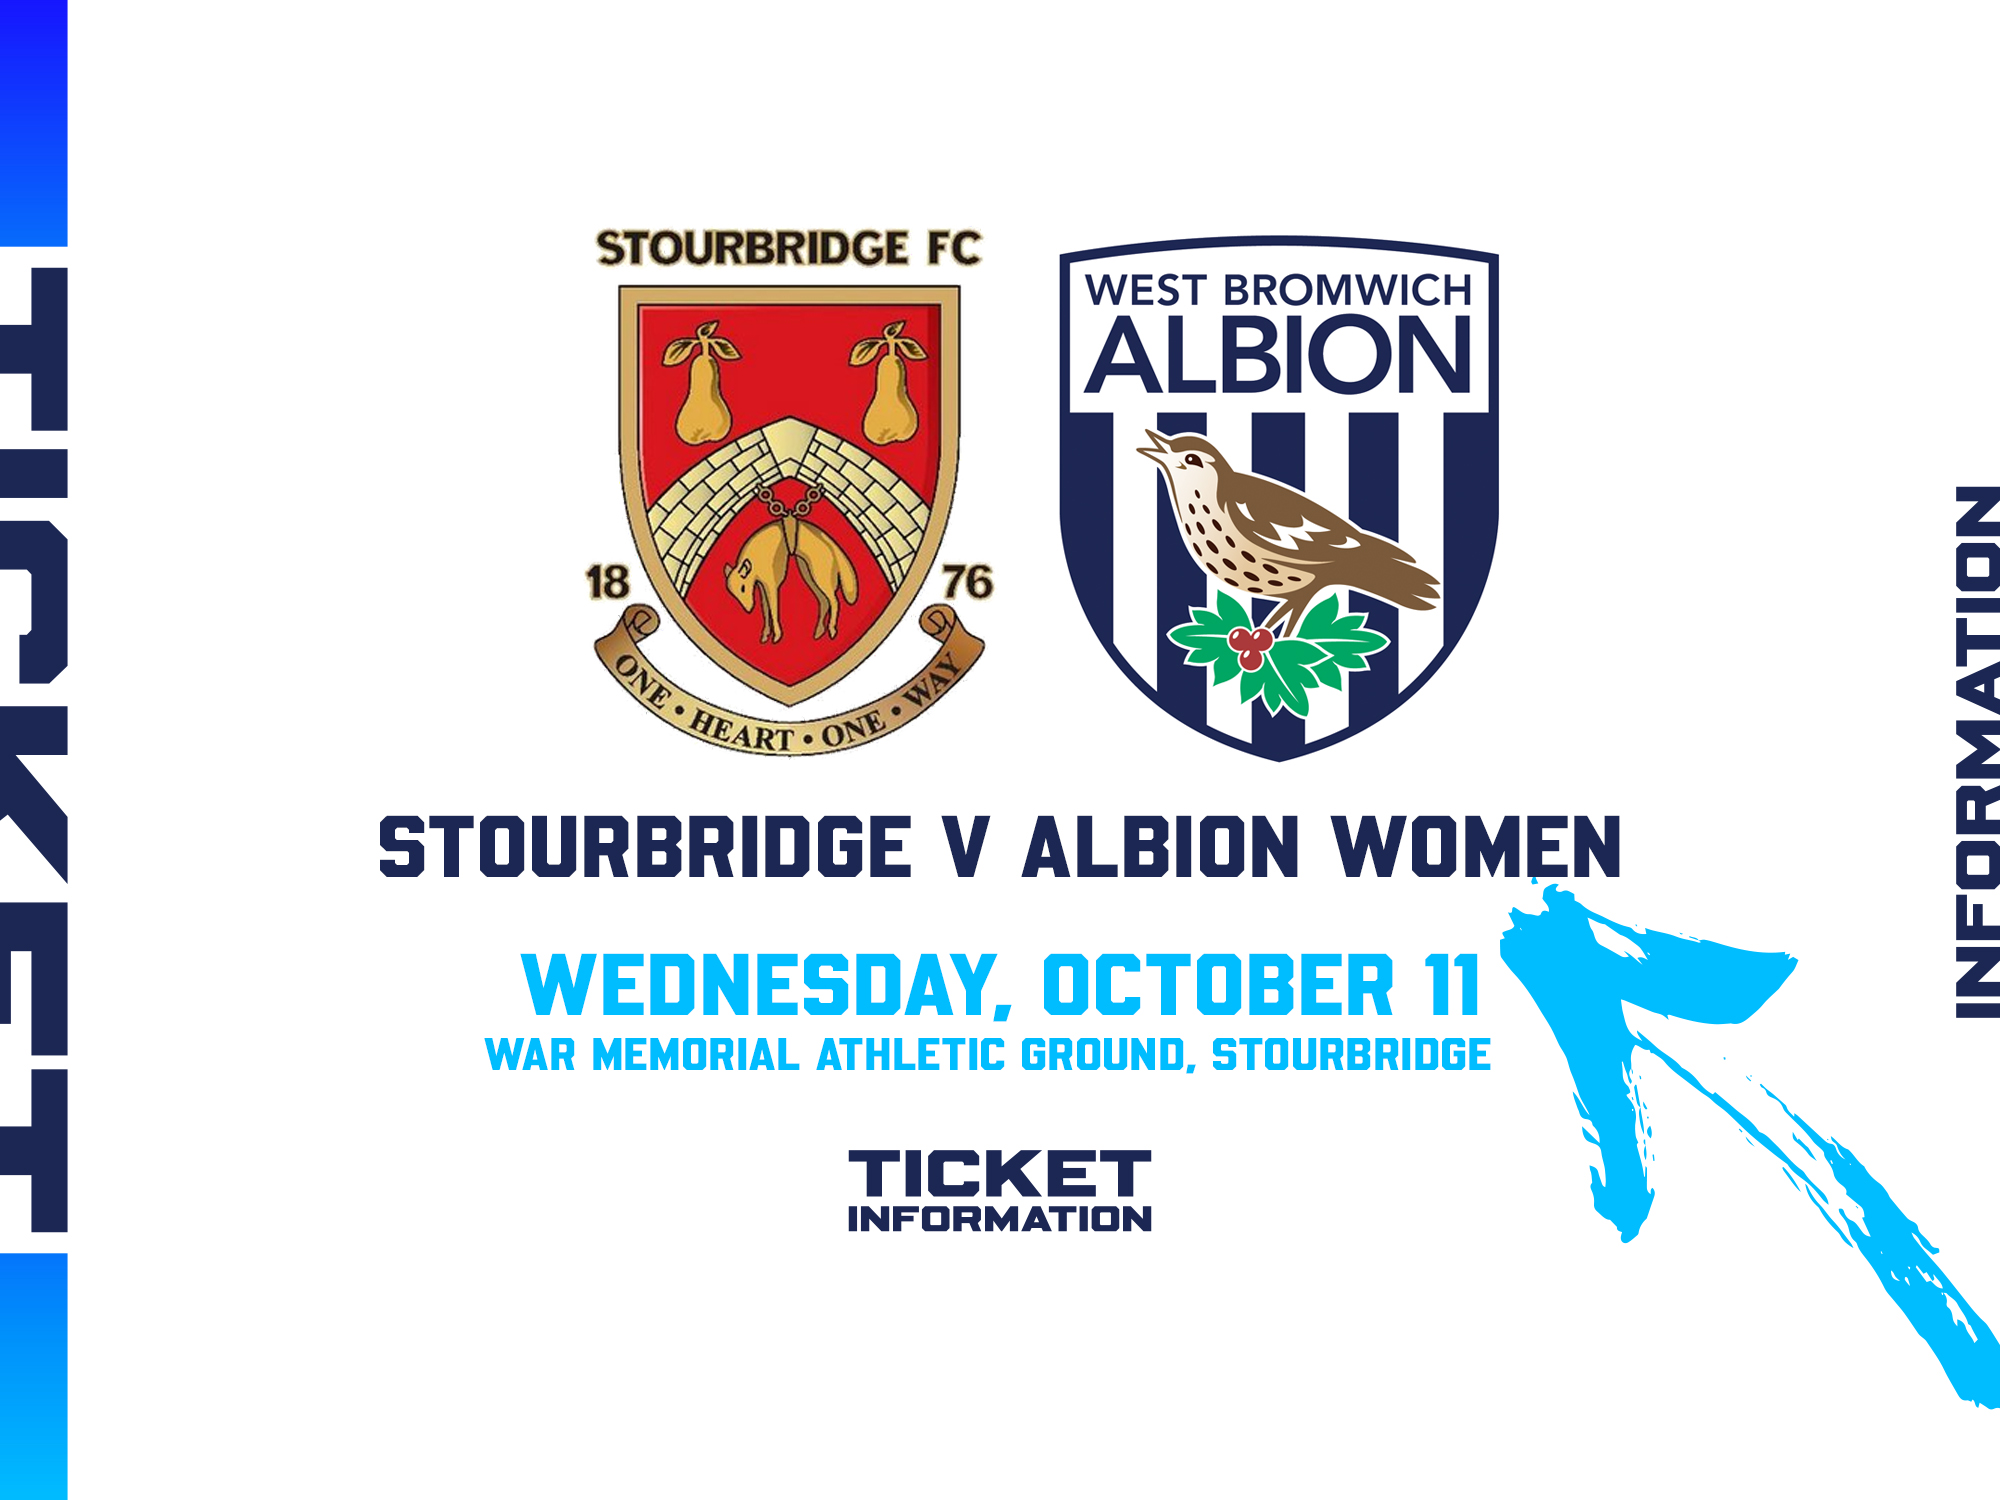 A ticket graphic displaying information for Albion Women's game against Stourbridge